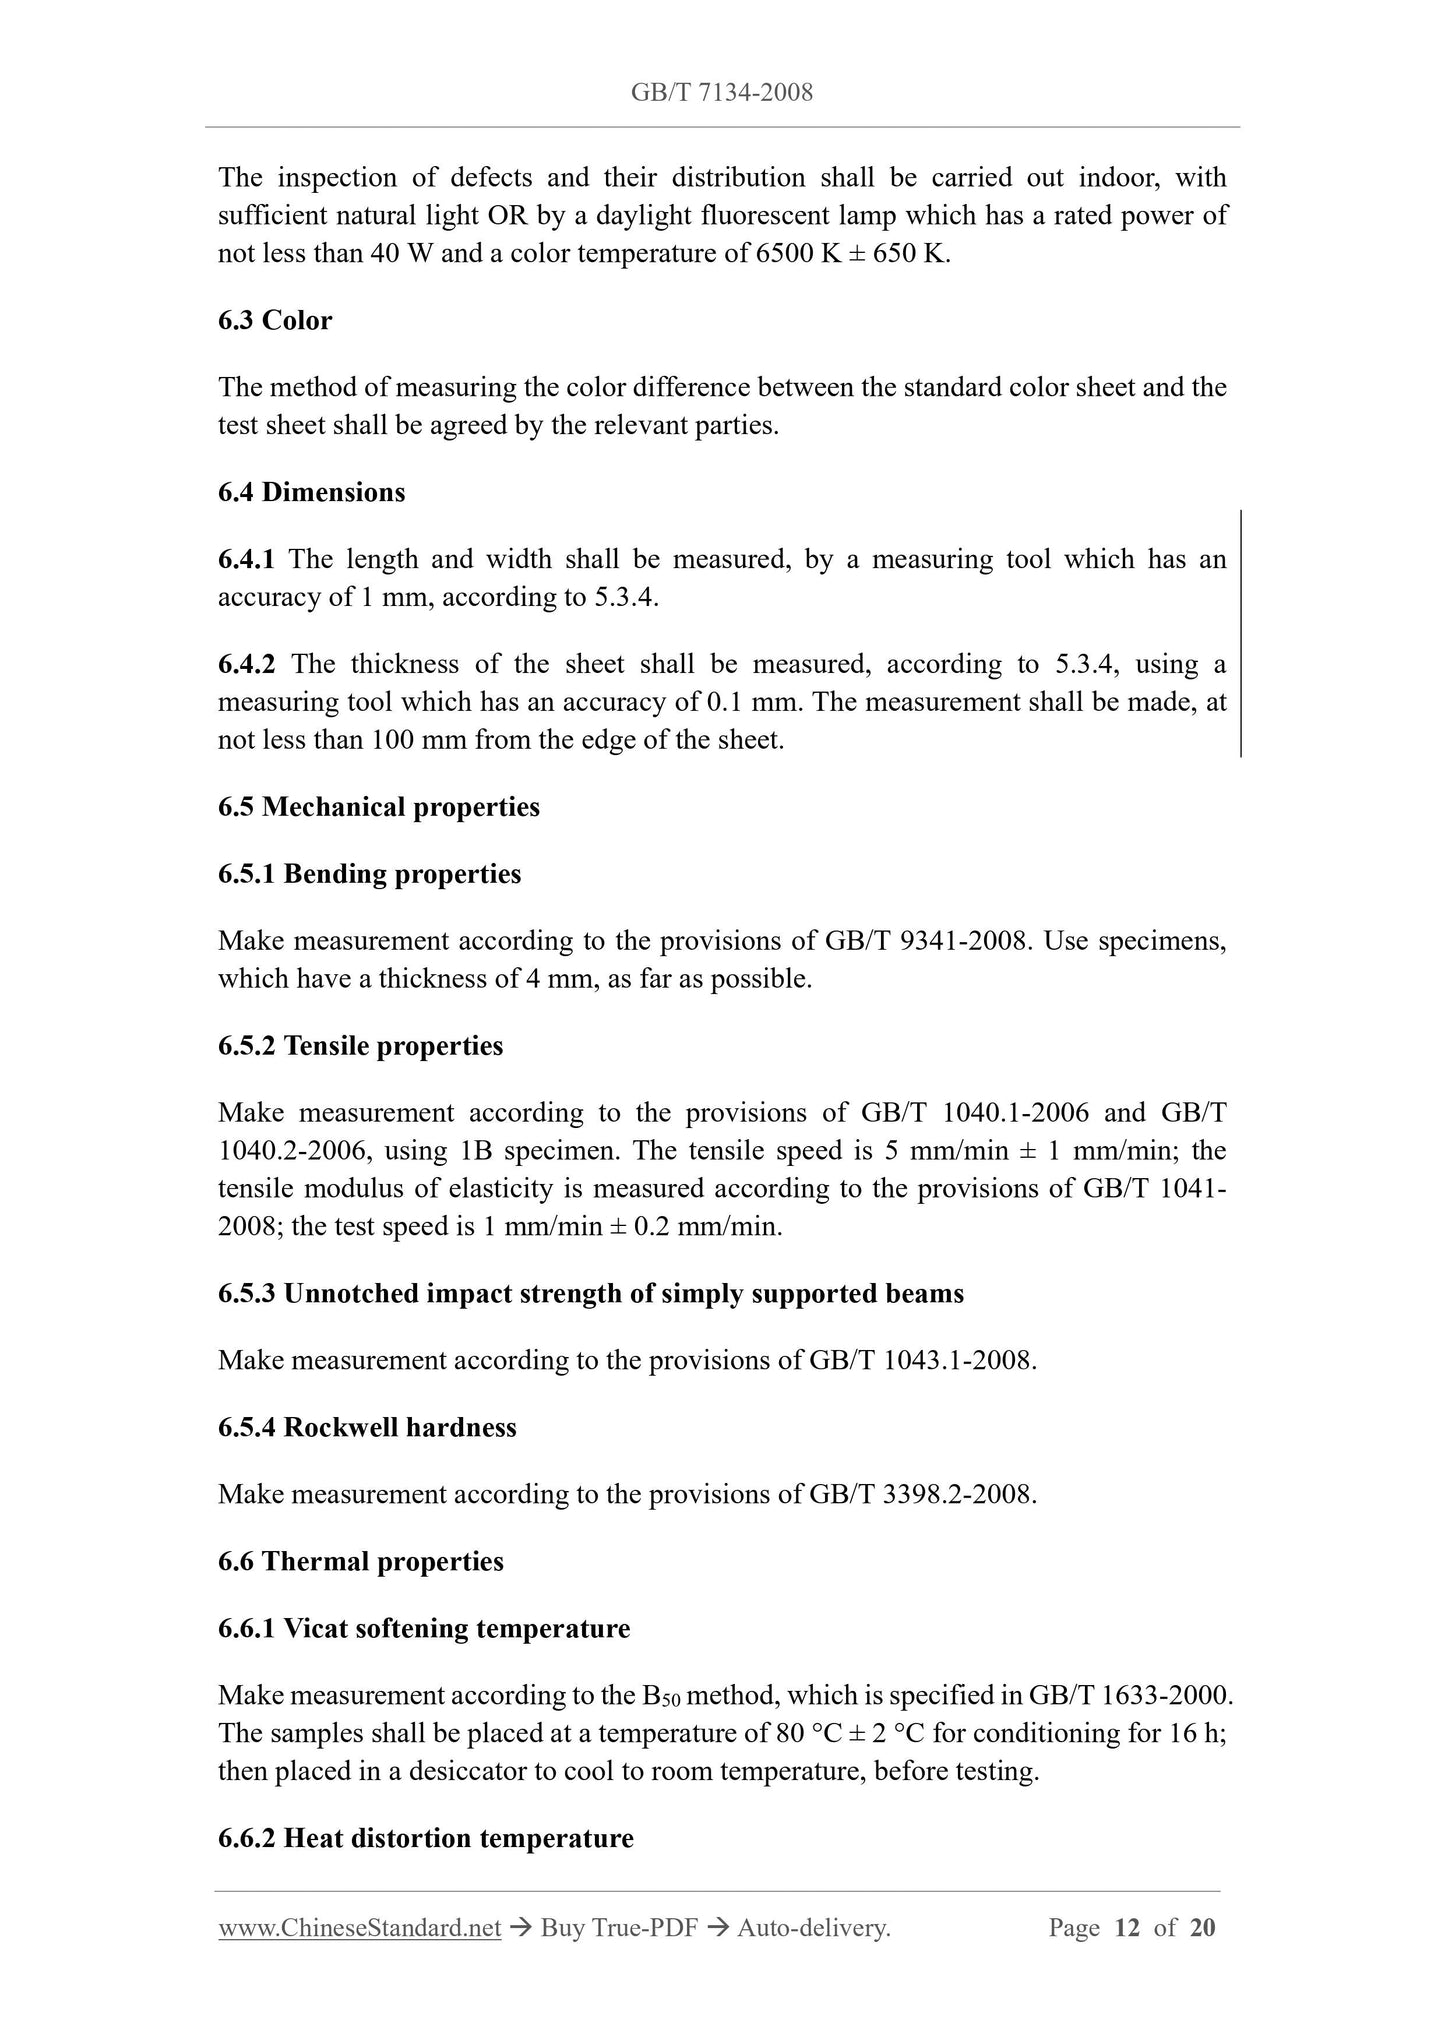 GB/T 7134-2008 Page 5